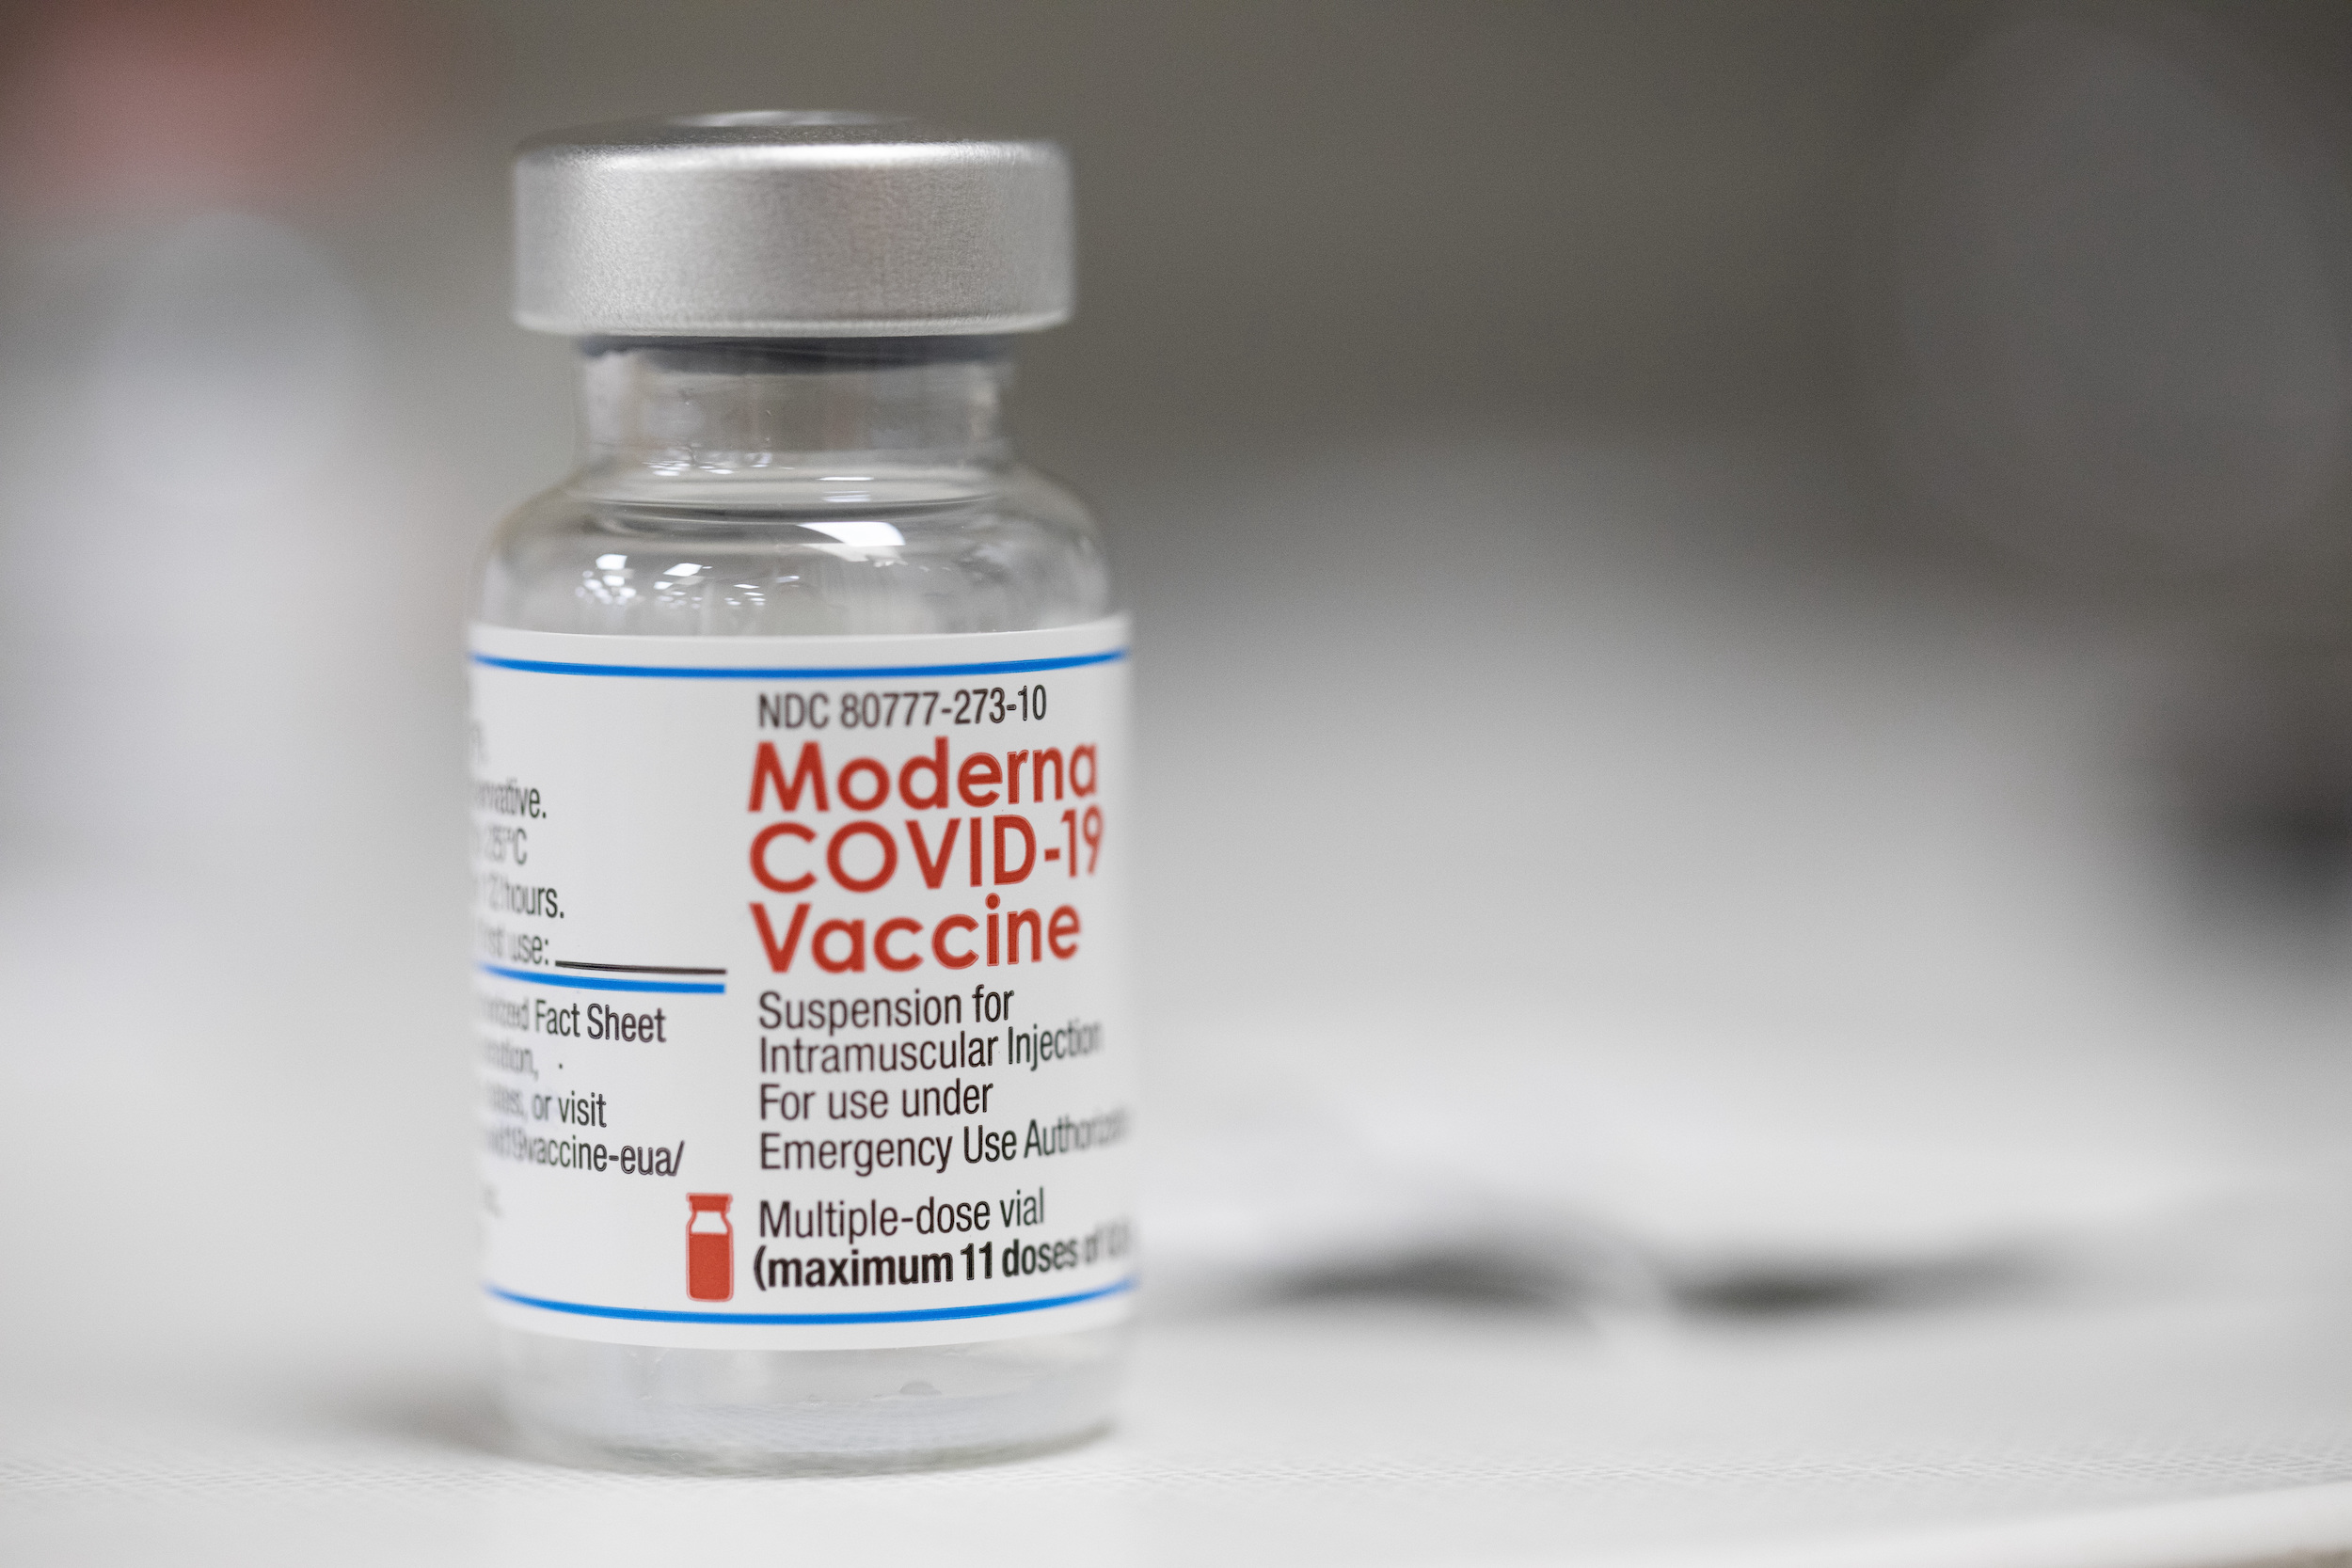 A New Jersey doctor’s office notice not proof of COVID-19 vaccines’ danger to young athletes